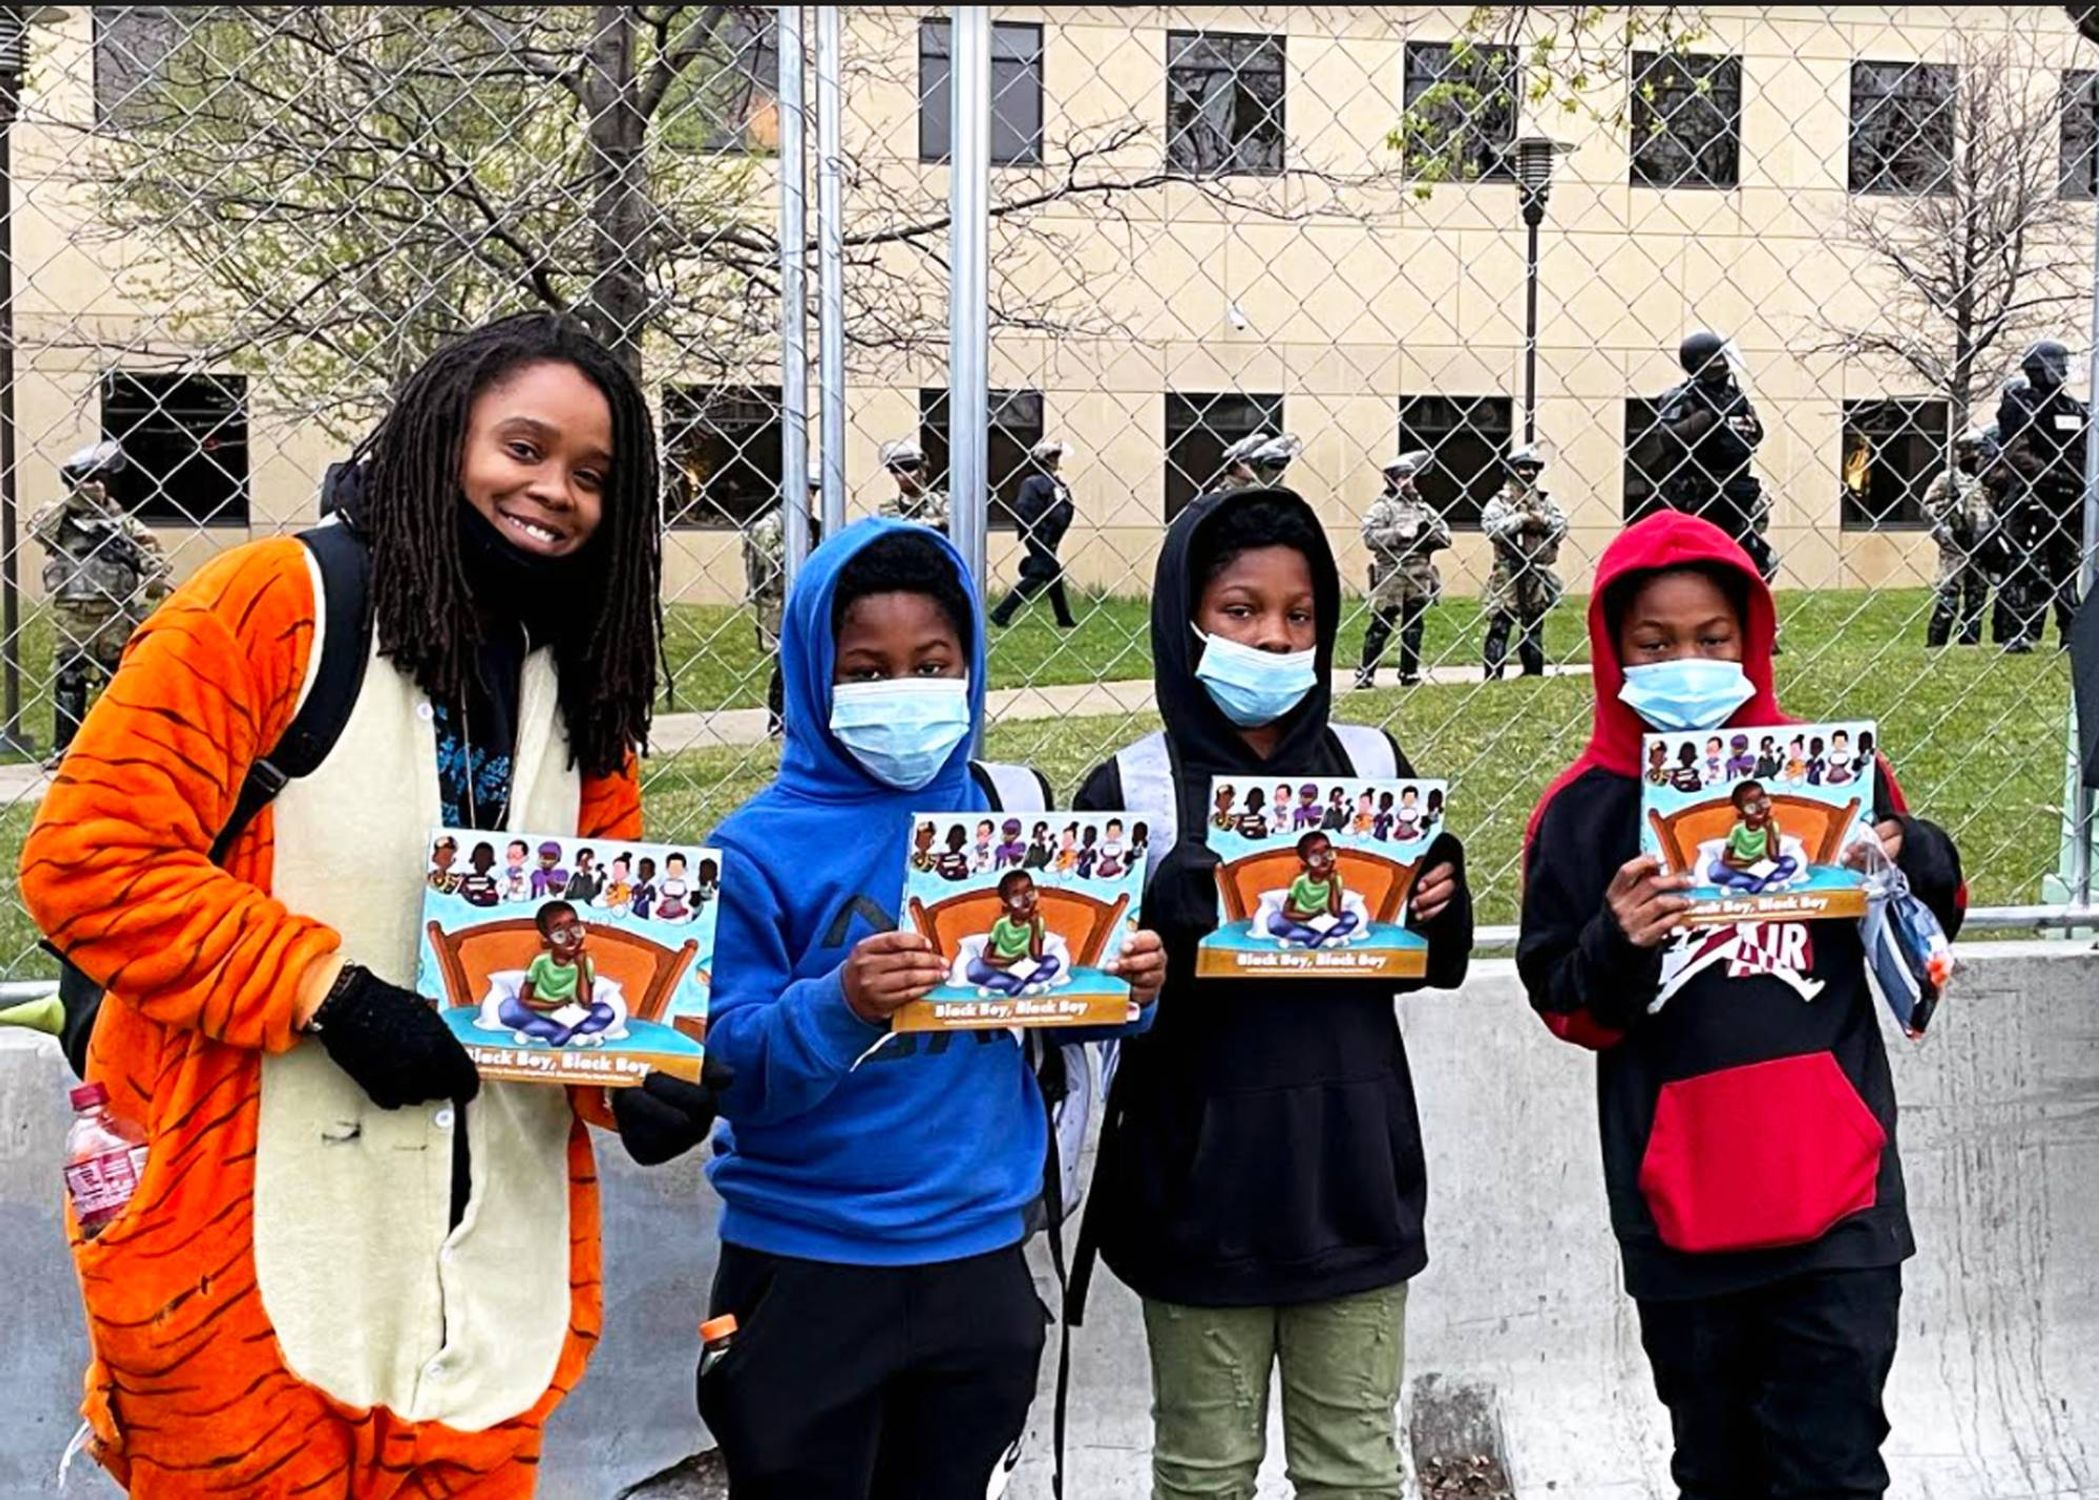 Author Crown Shepherd, a.k.a. Crown the Writer, shared her book Black Boy, Black Boy with three boys attending a protest. | Photo courtesy of Crown Shepherd.